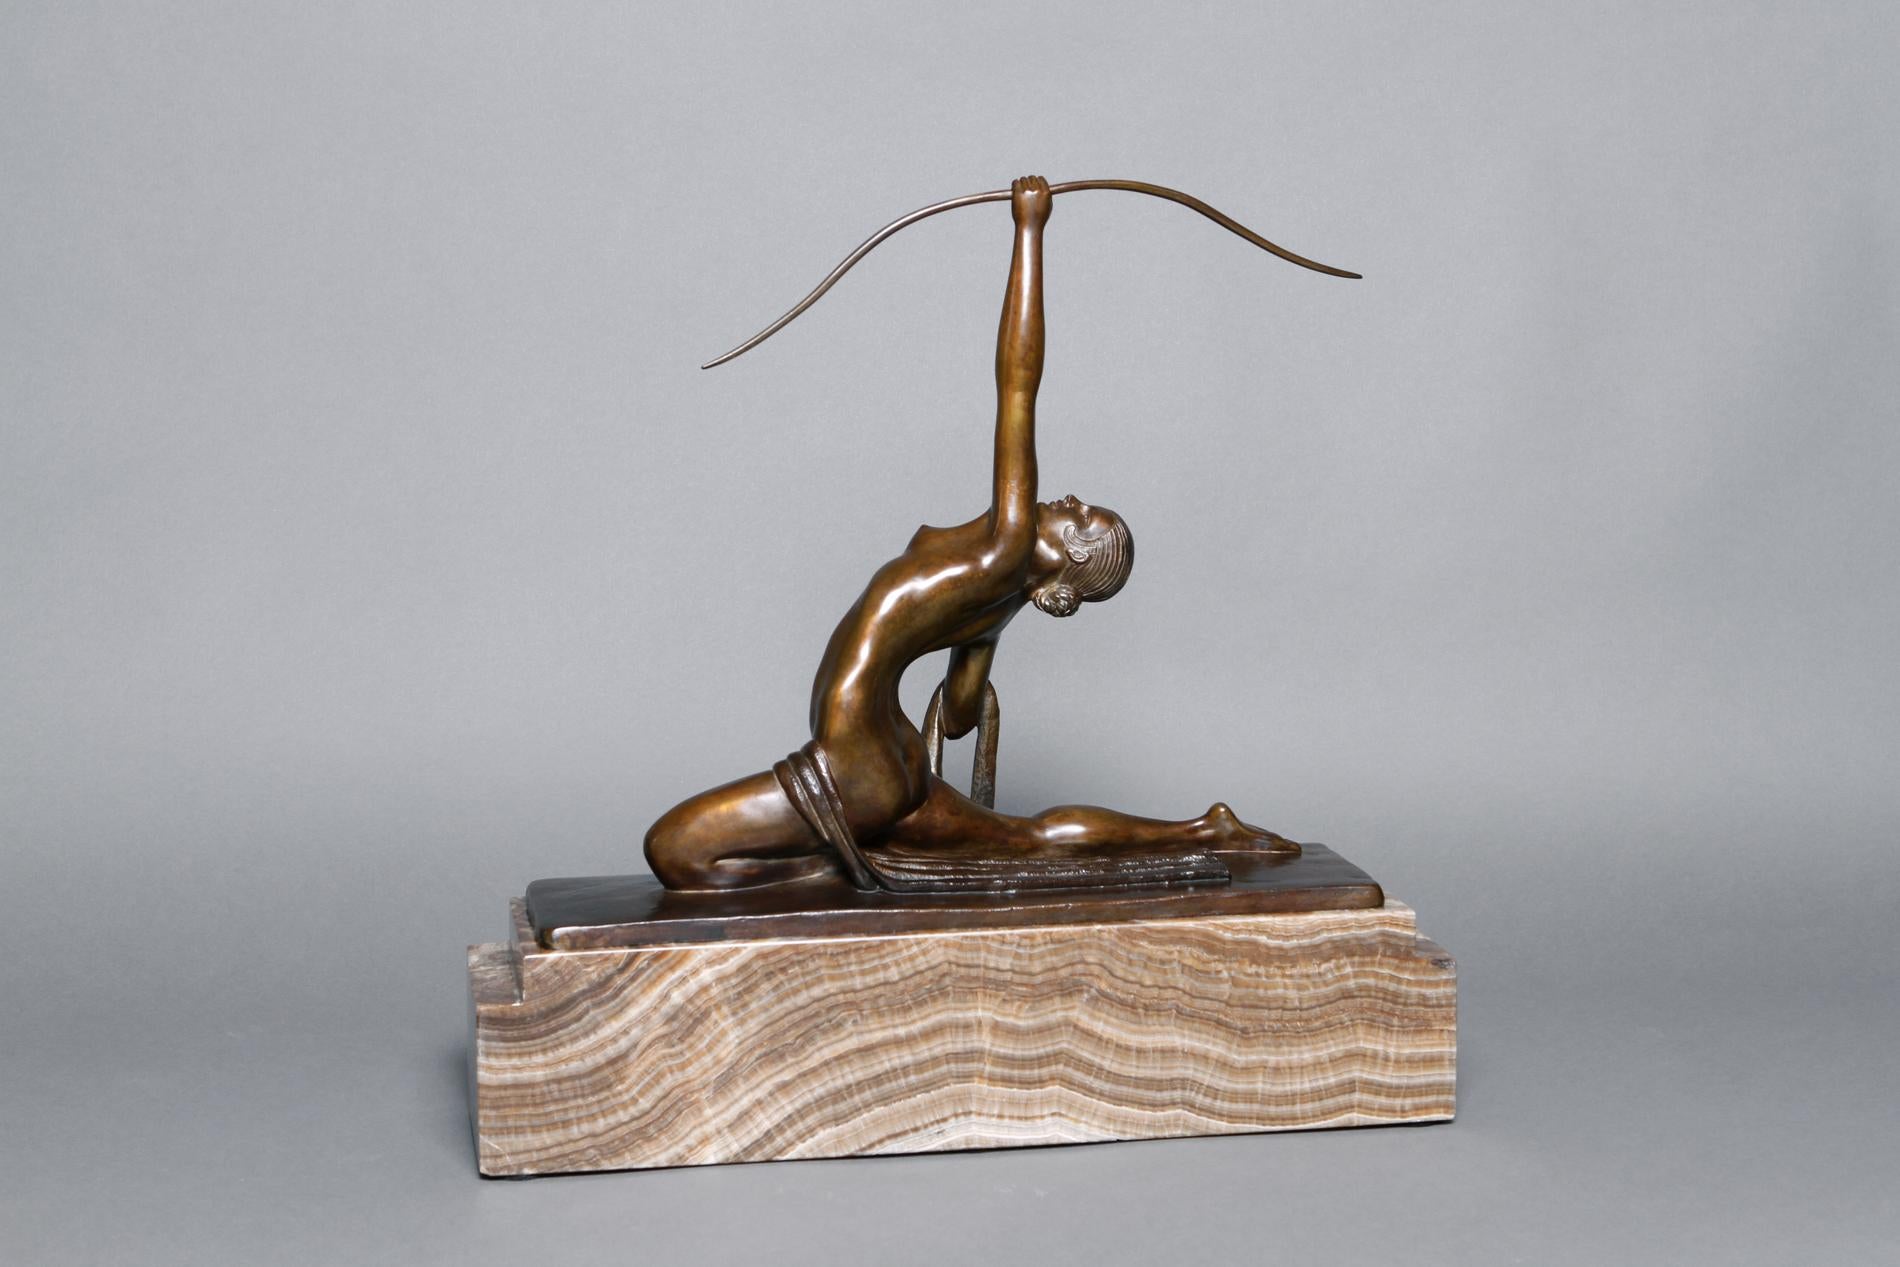 Bronze patinated sculpture by Marcel-André Bouraine representing Diana, female archer. The sculptor choose to represent a naked young woman with length of cloth draped across lap, kneeling backwards and aiming with a bow towards the sky. On a